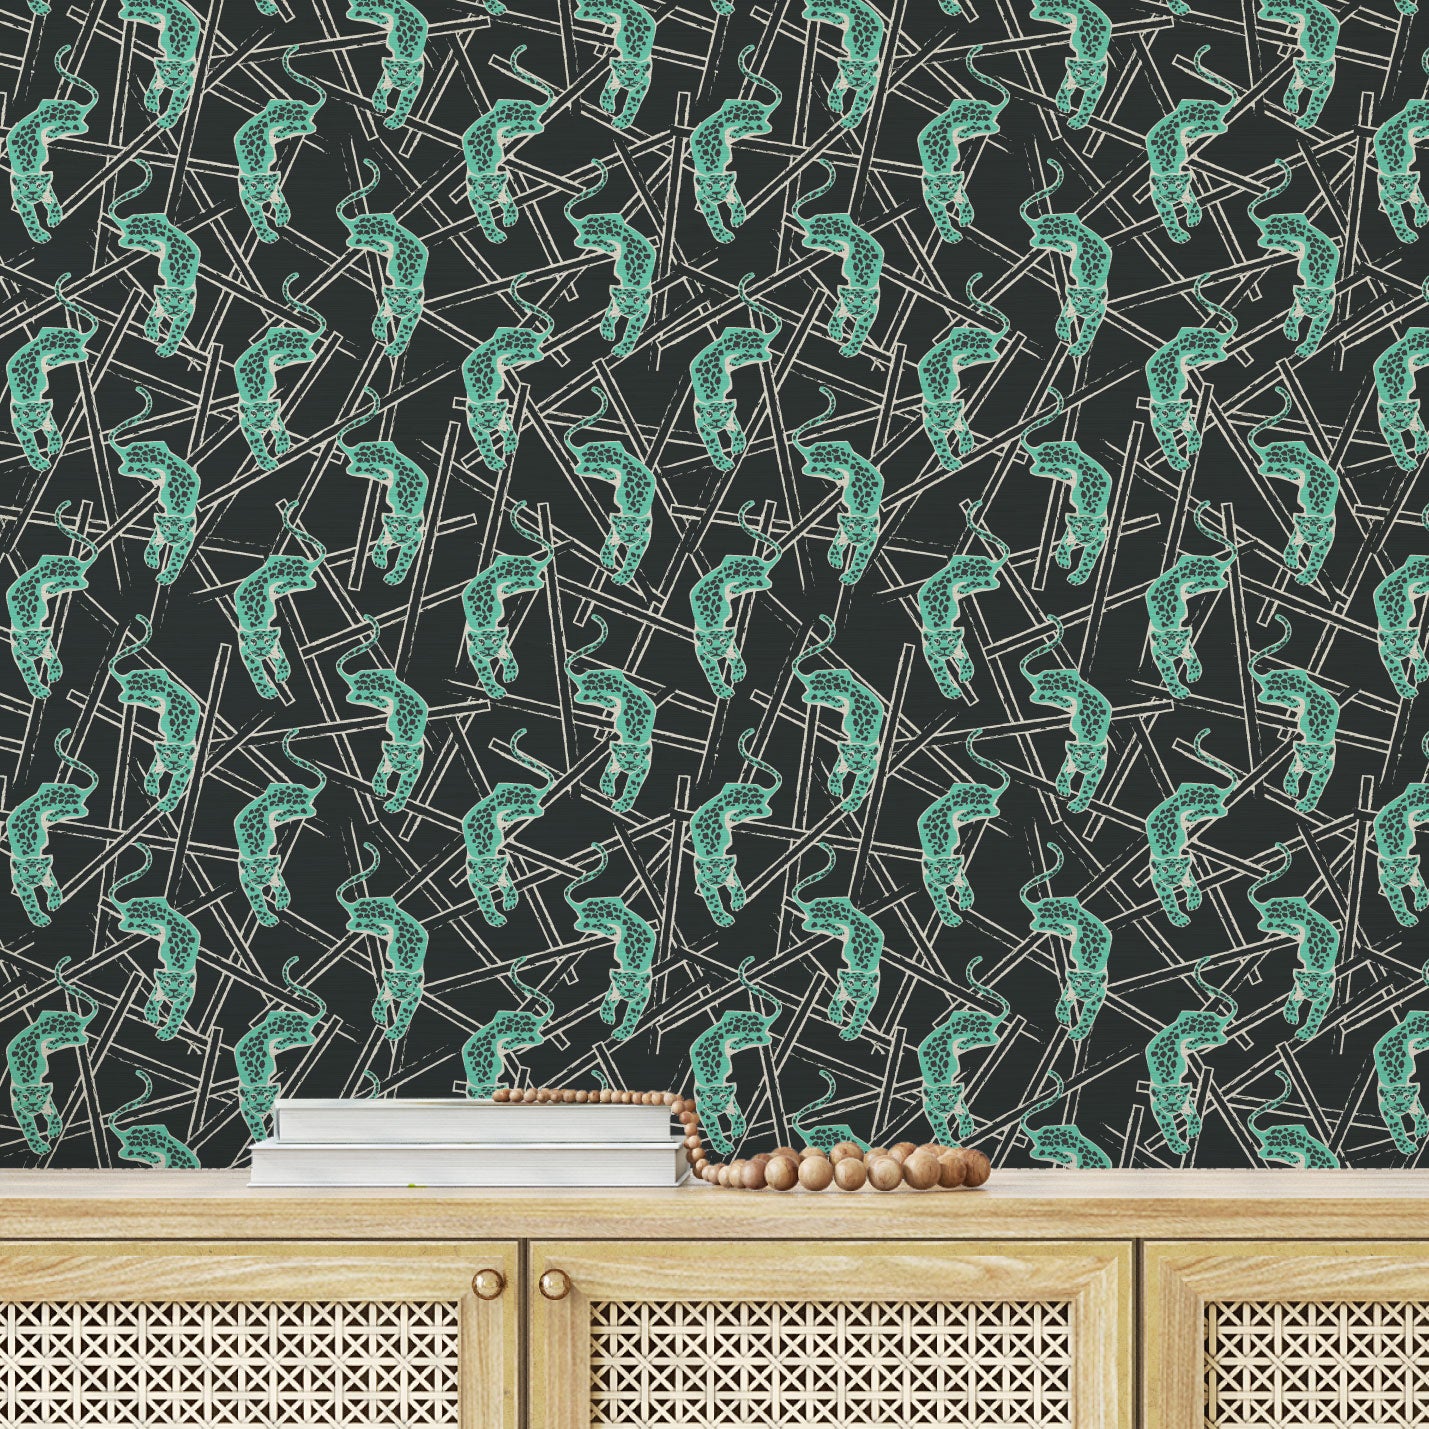 Grasscloth wallpaper Natural Textured Eco-Friendly Non-toxic High-quality  Sustainable Interior Design Bold Custom Tailor-made Retro chic Grand millennial Maximalism  Traditional Dopamine decor tropical jungle garden vacation animal cheetah black mint